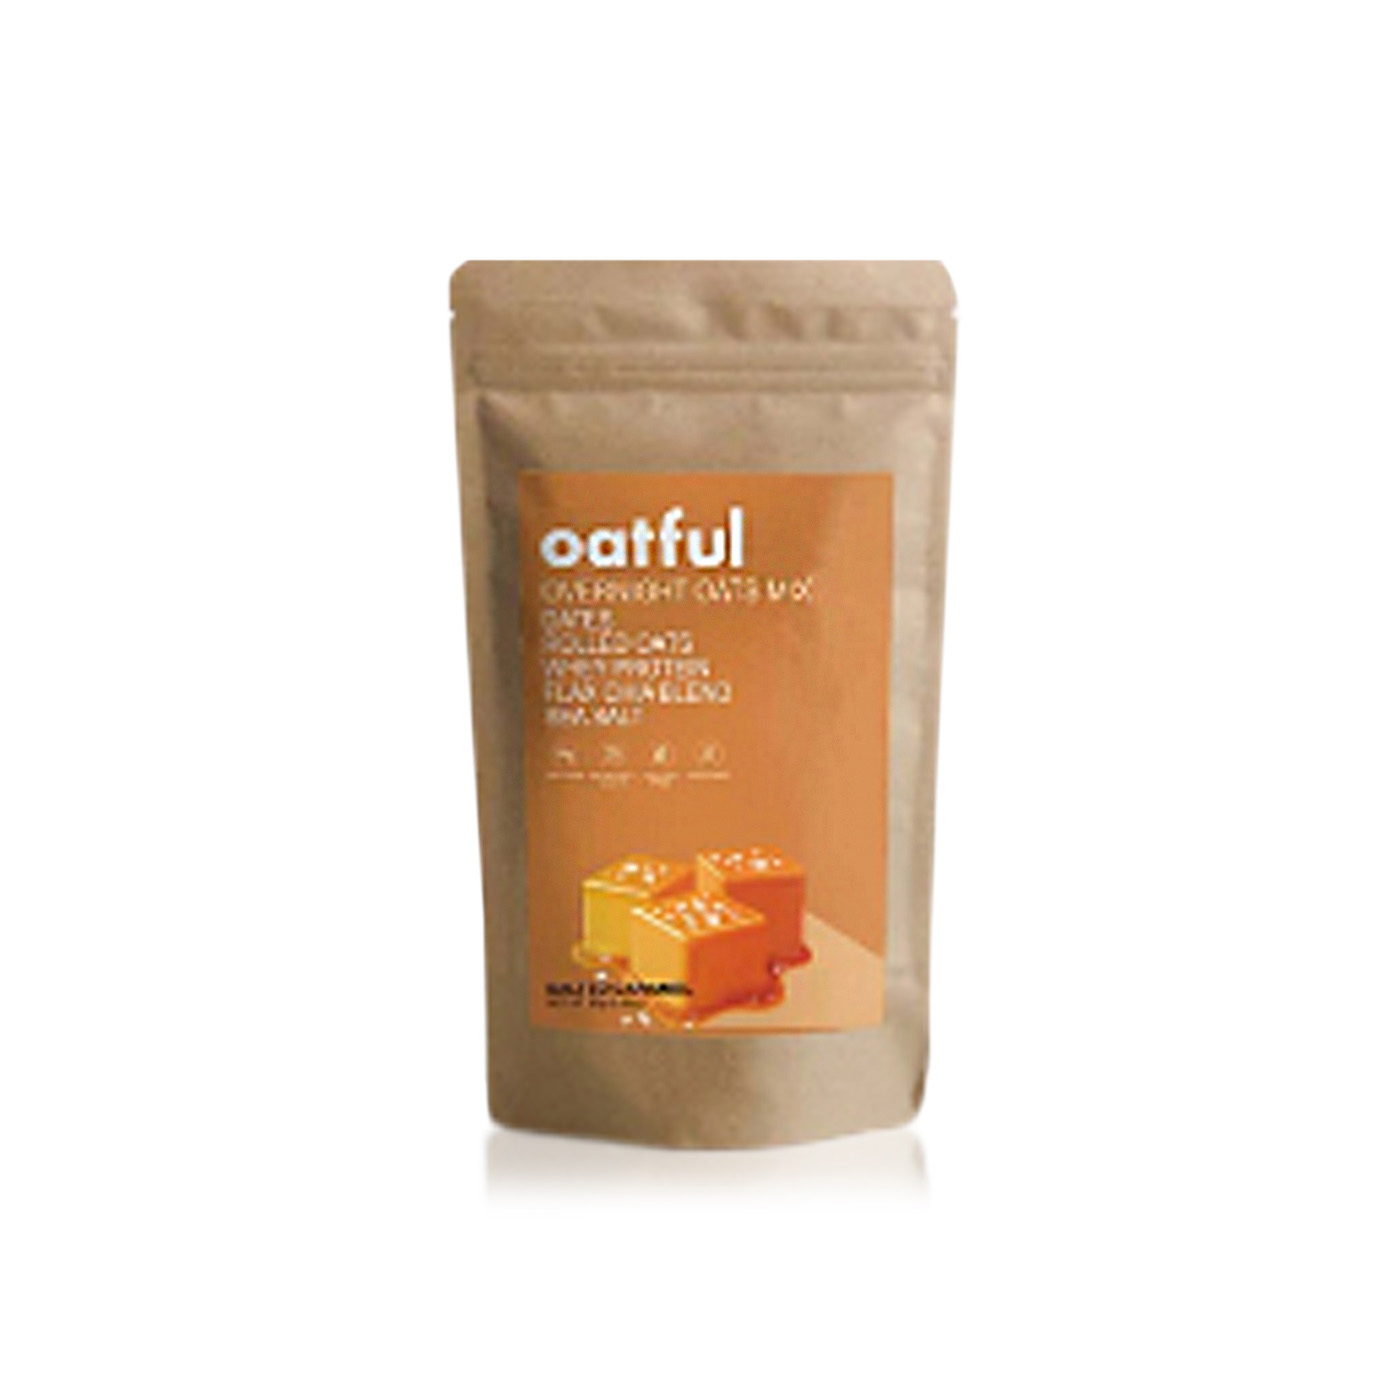 Oatful salted caramel protein overnight oats mix 85g - Spinneys UAE